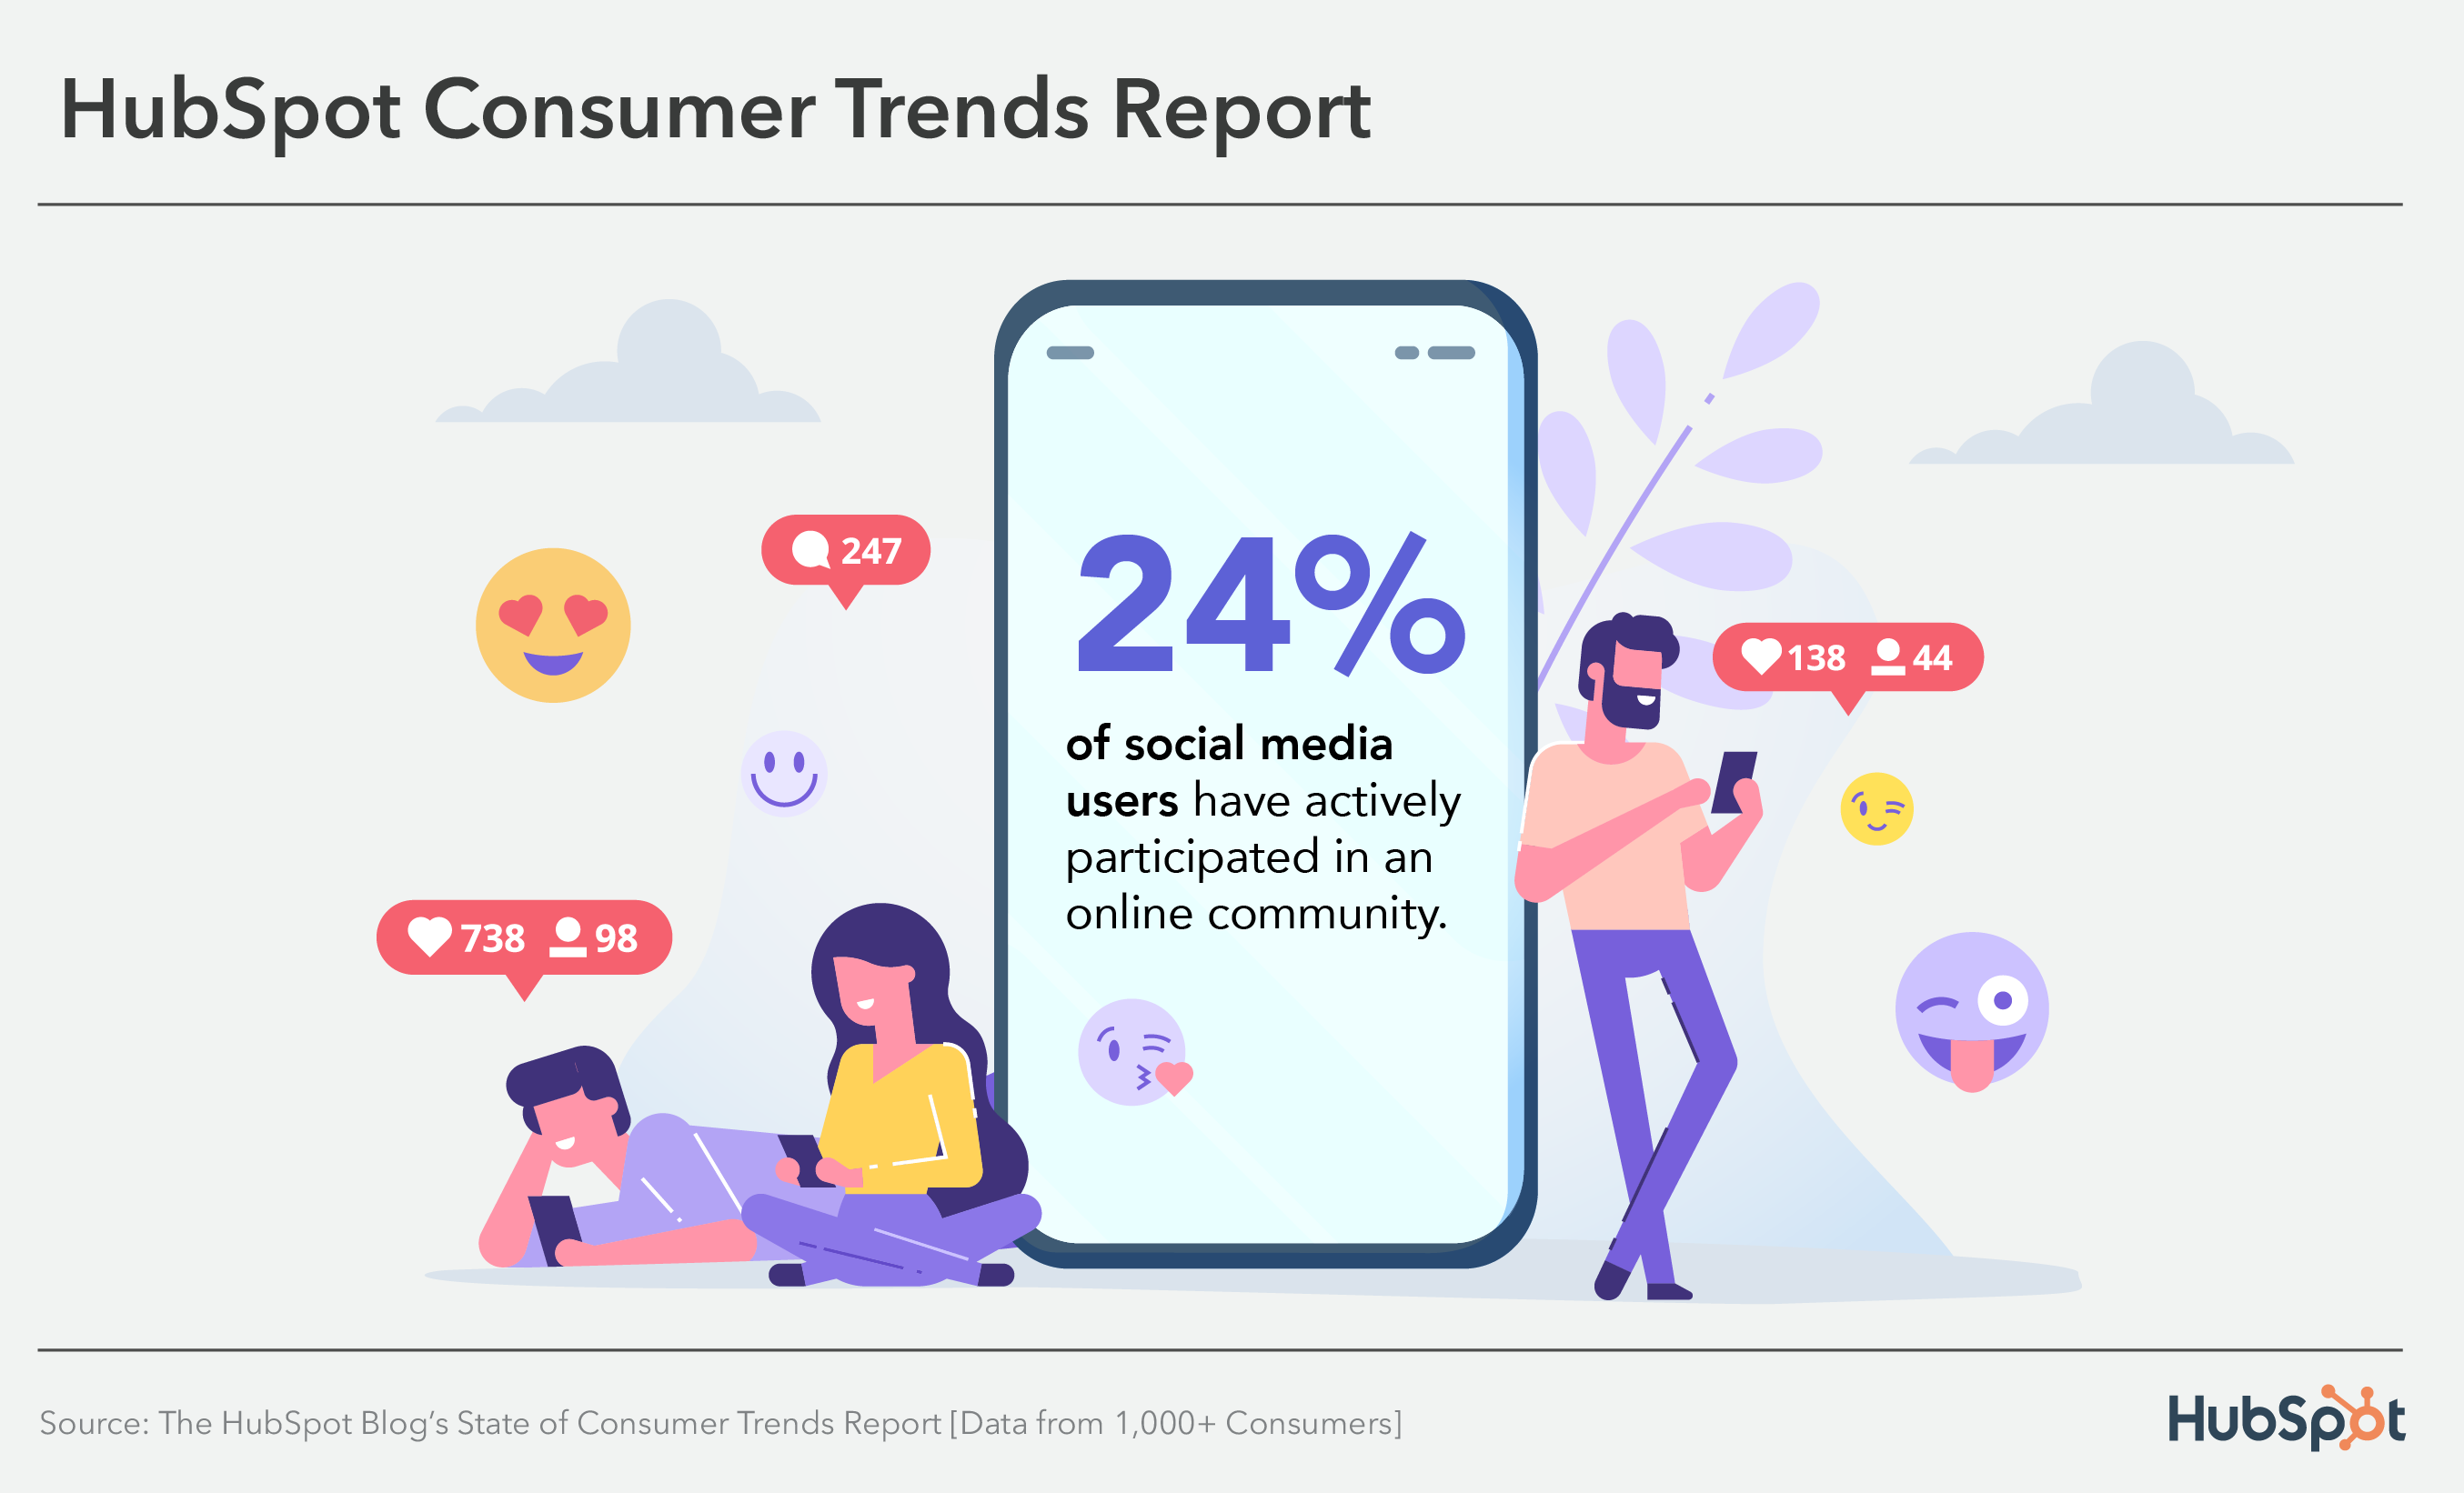 24% of consumers have actively participated in an online community